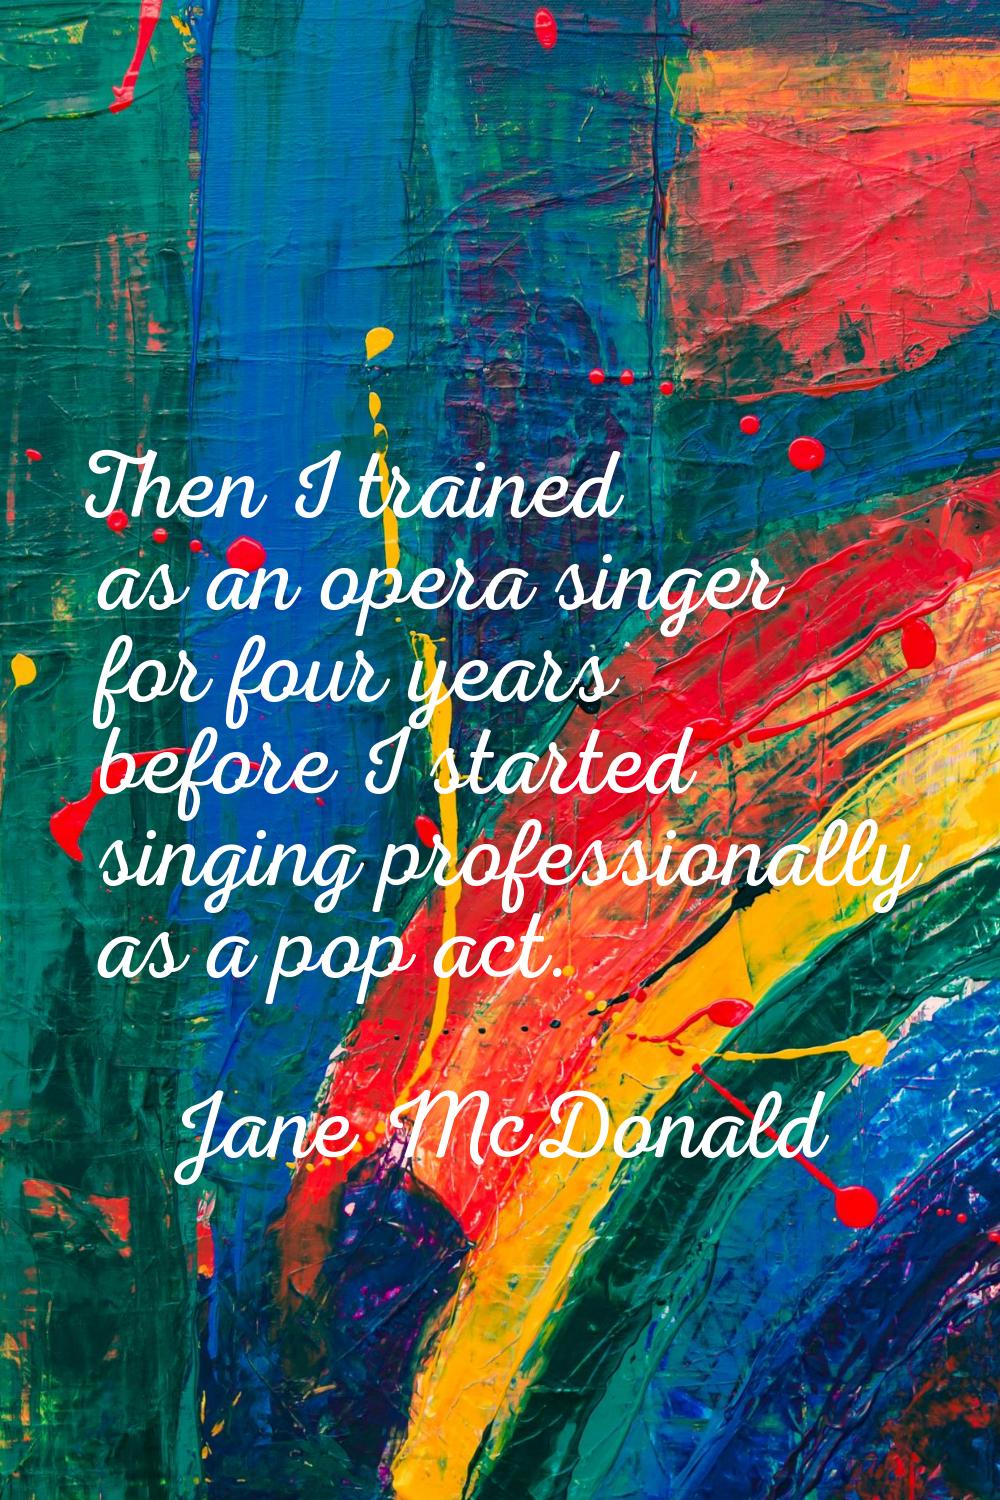 Then I trained as an opera singer for four years before I started singing professionally as a pop a